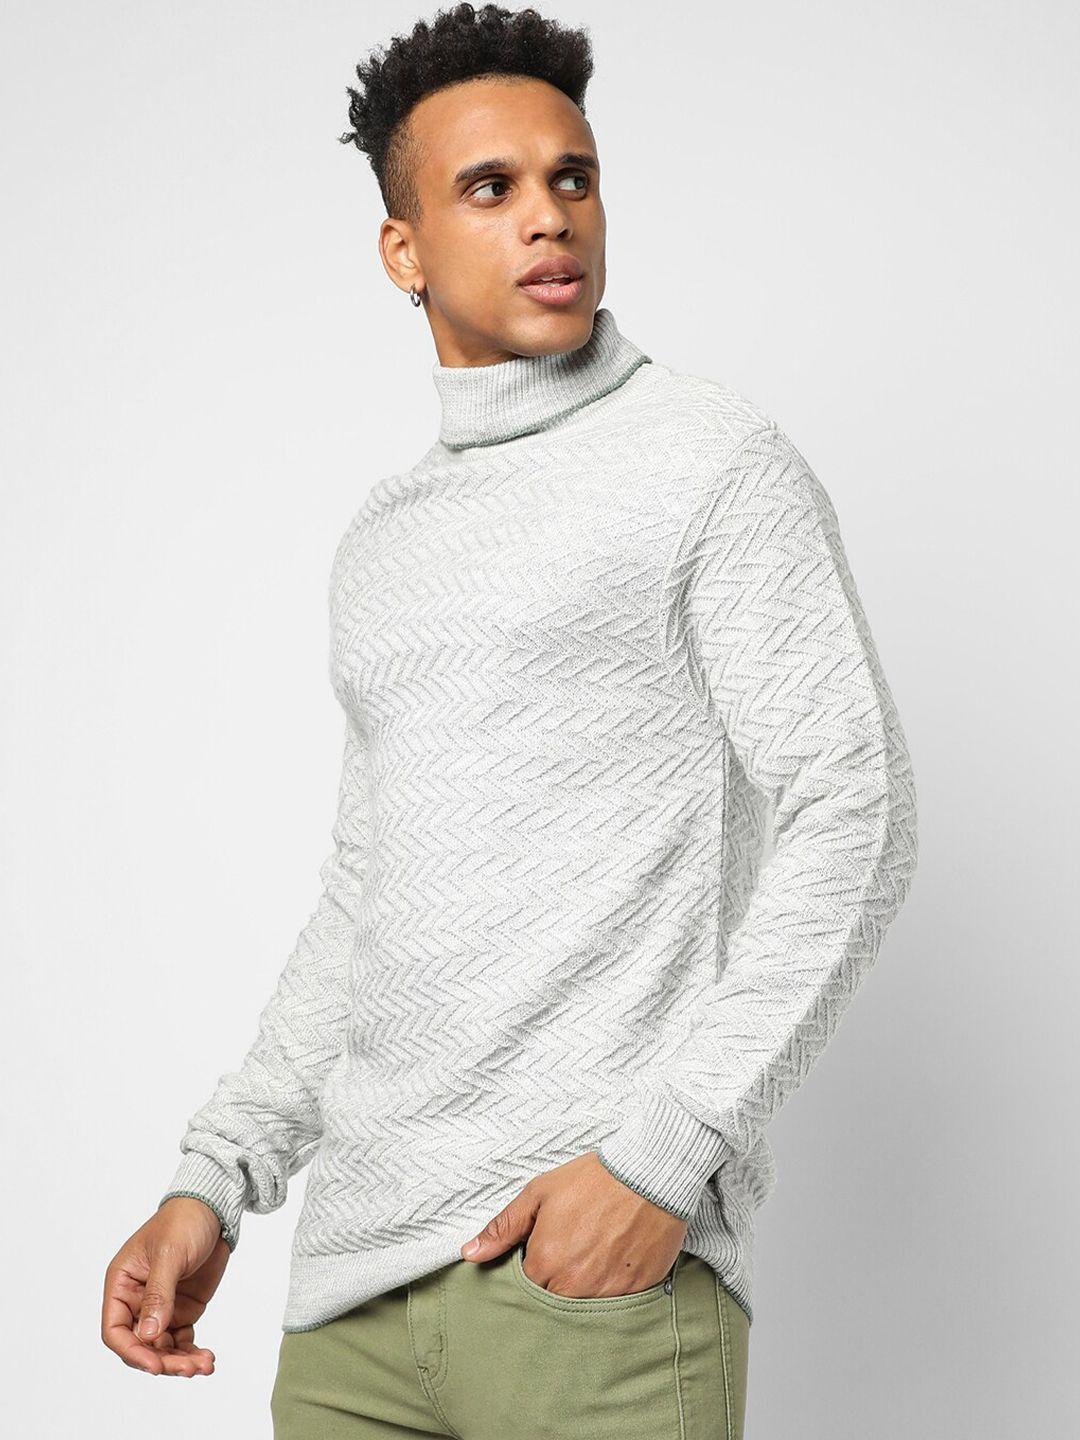 campus-sutra-men-grey-melange-cable-knit-pullover-sweater